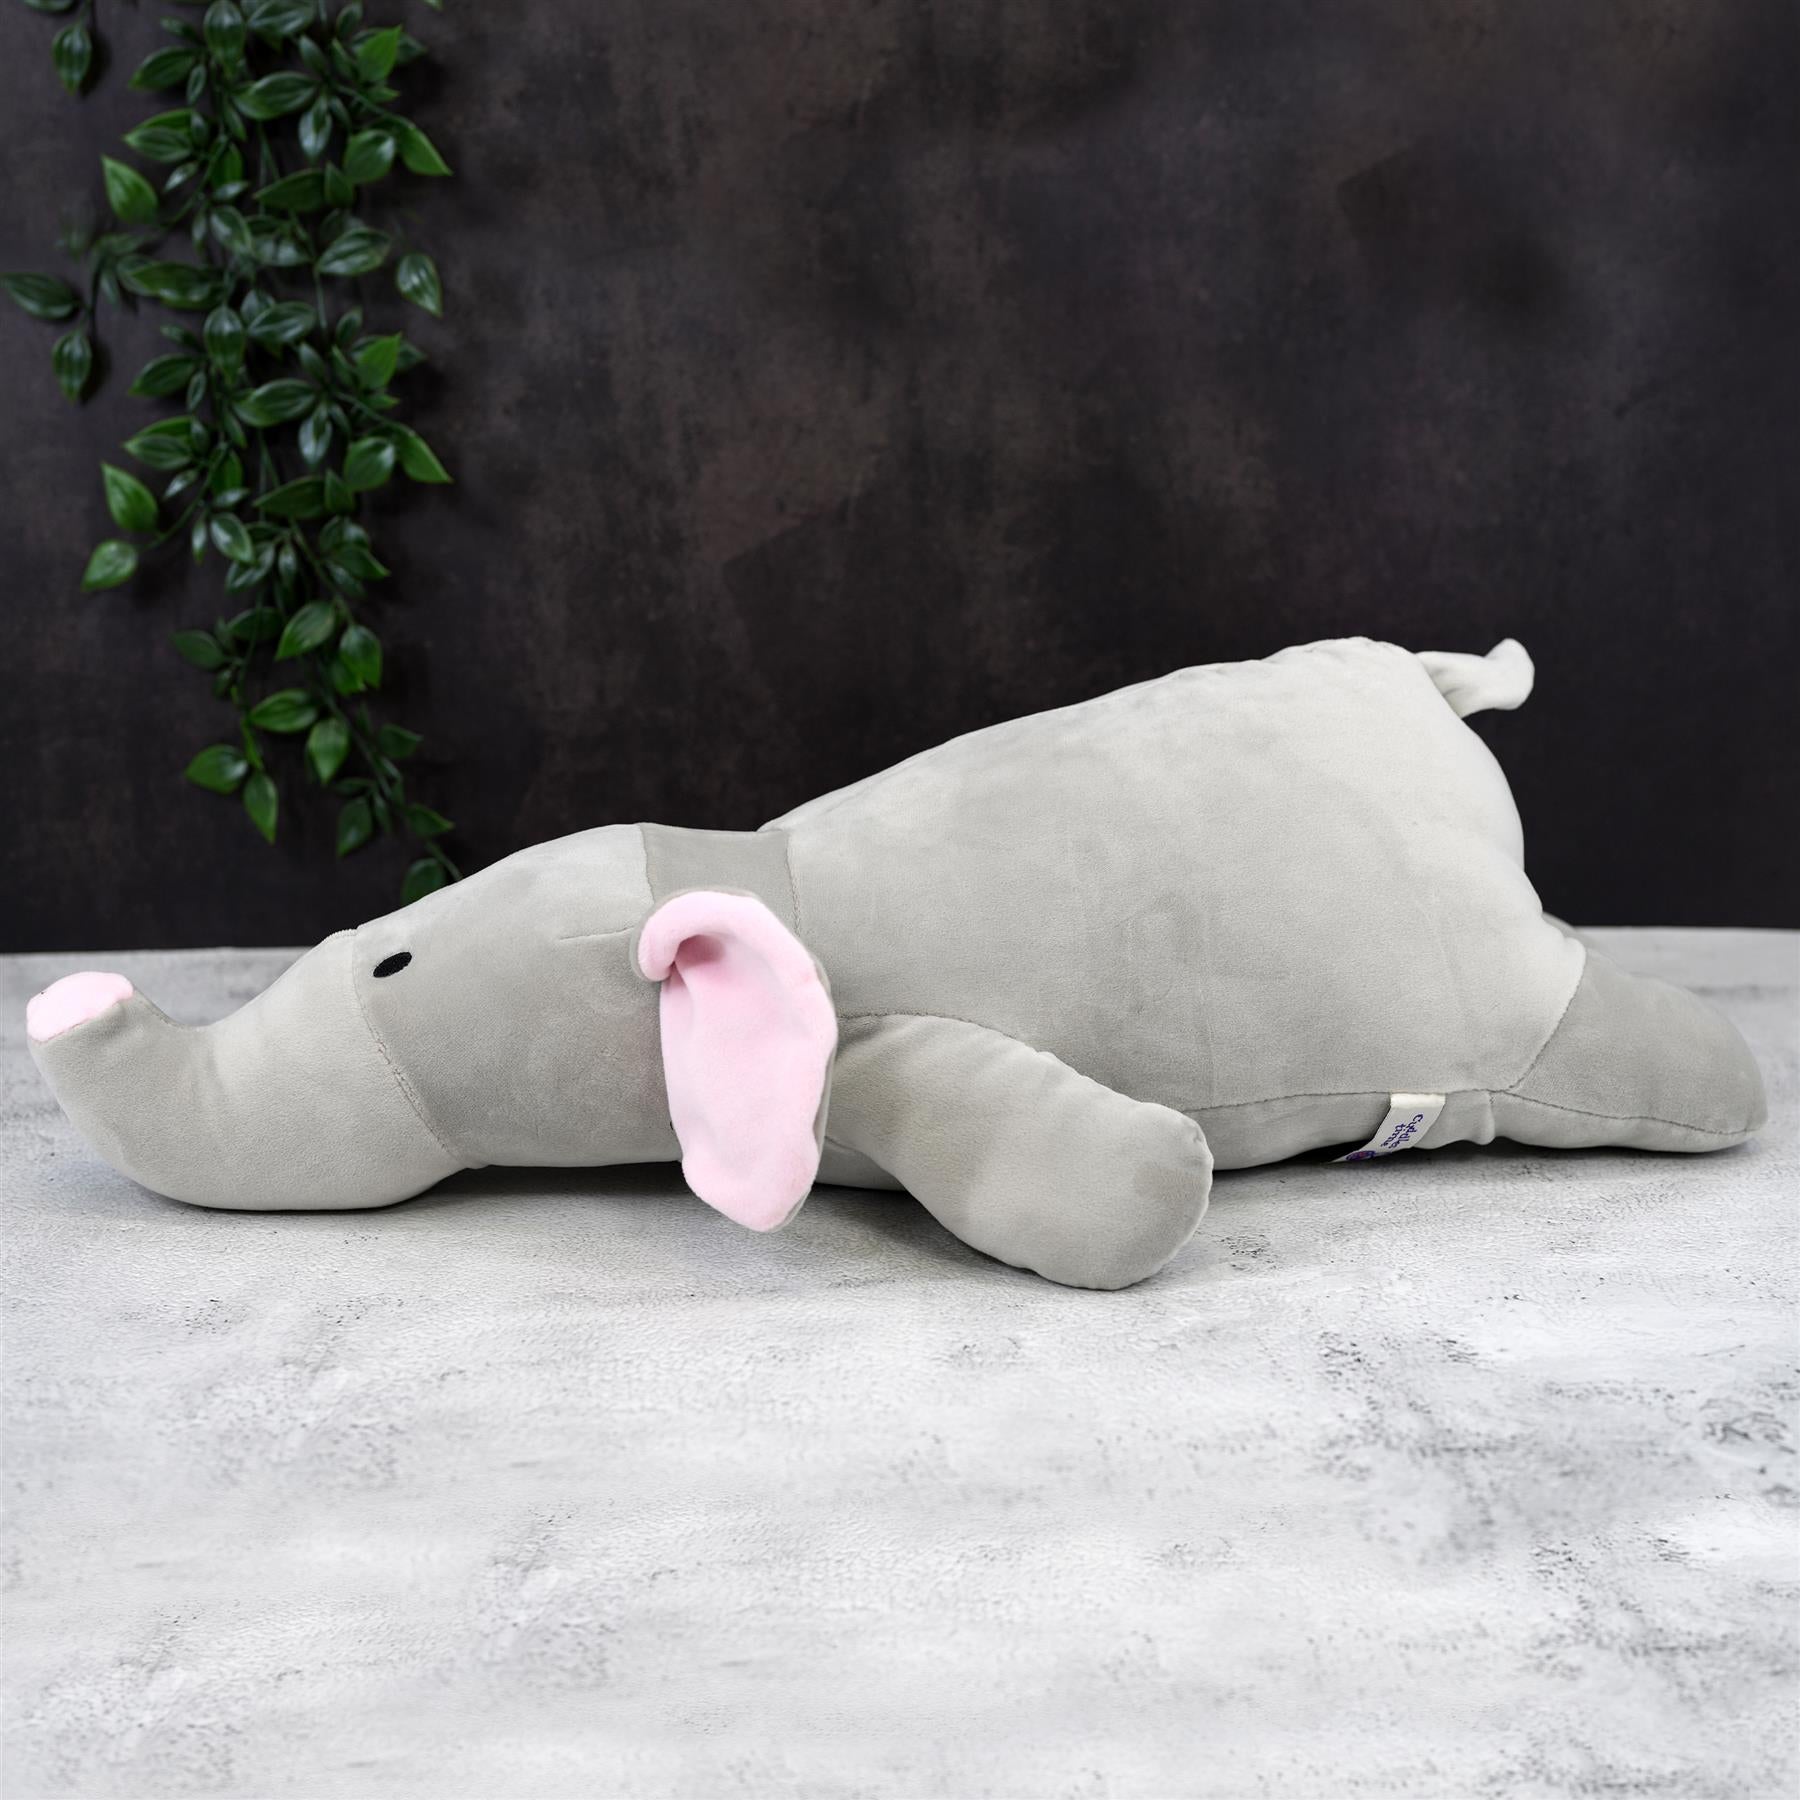 20” Super-Soft Elephant Plush Pillow Toy by The Magic Toy Shop - The Magic Toy Shop